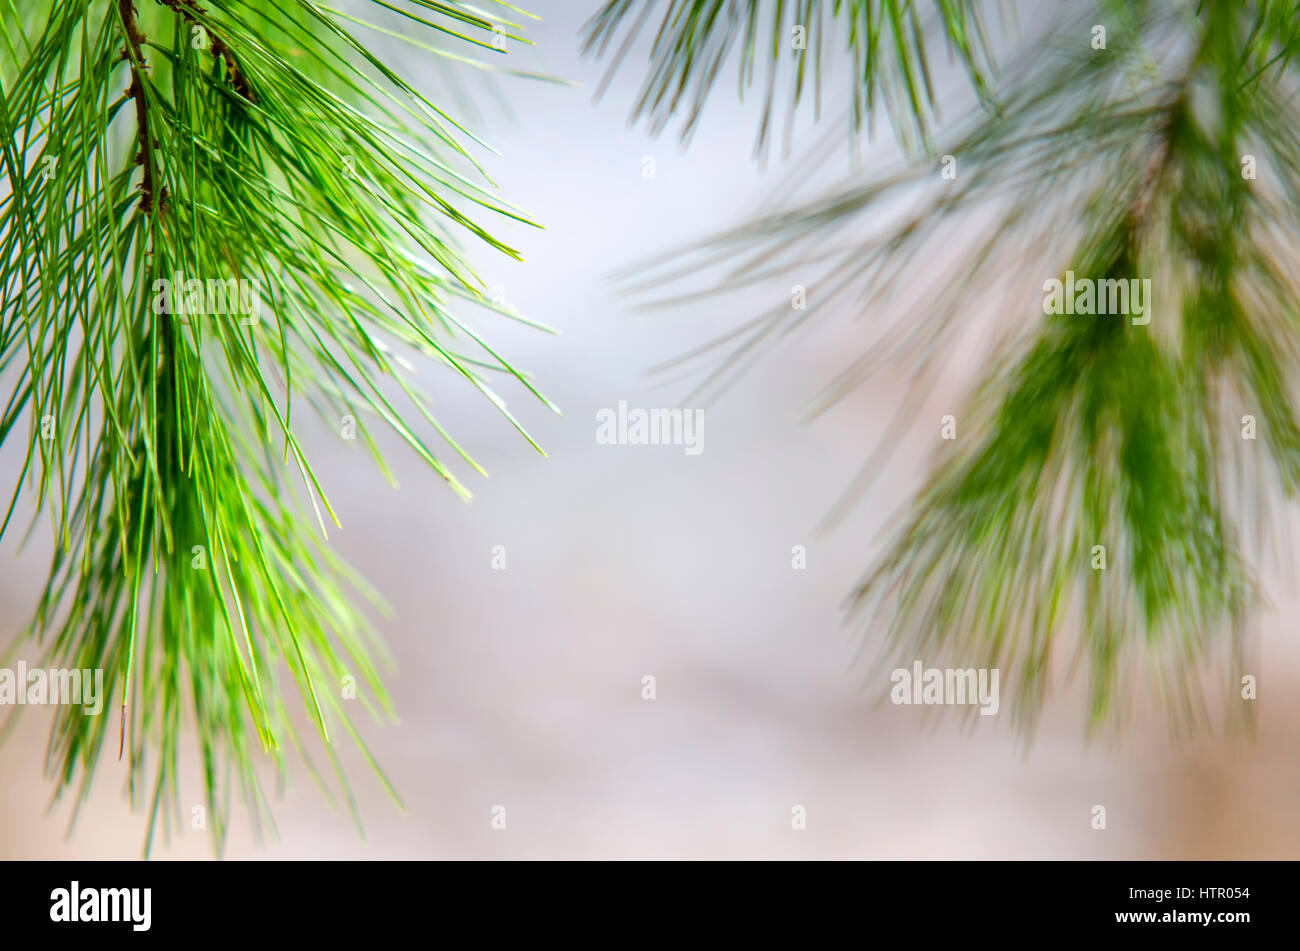 White pine branch with needles on natural background. Stock Photo